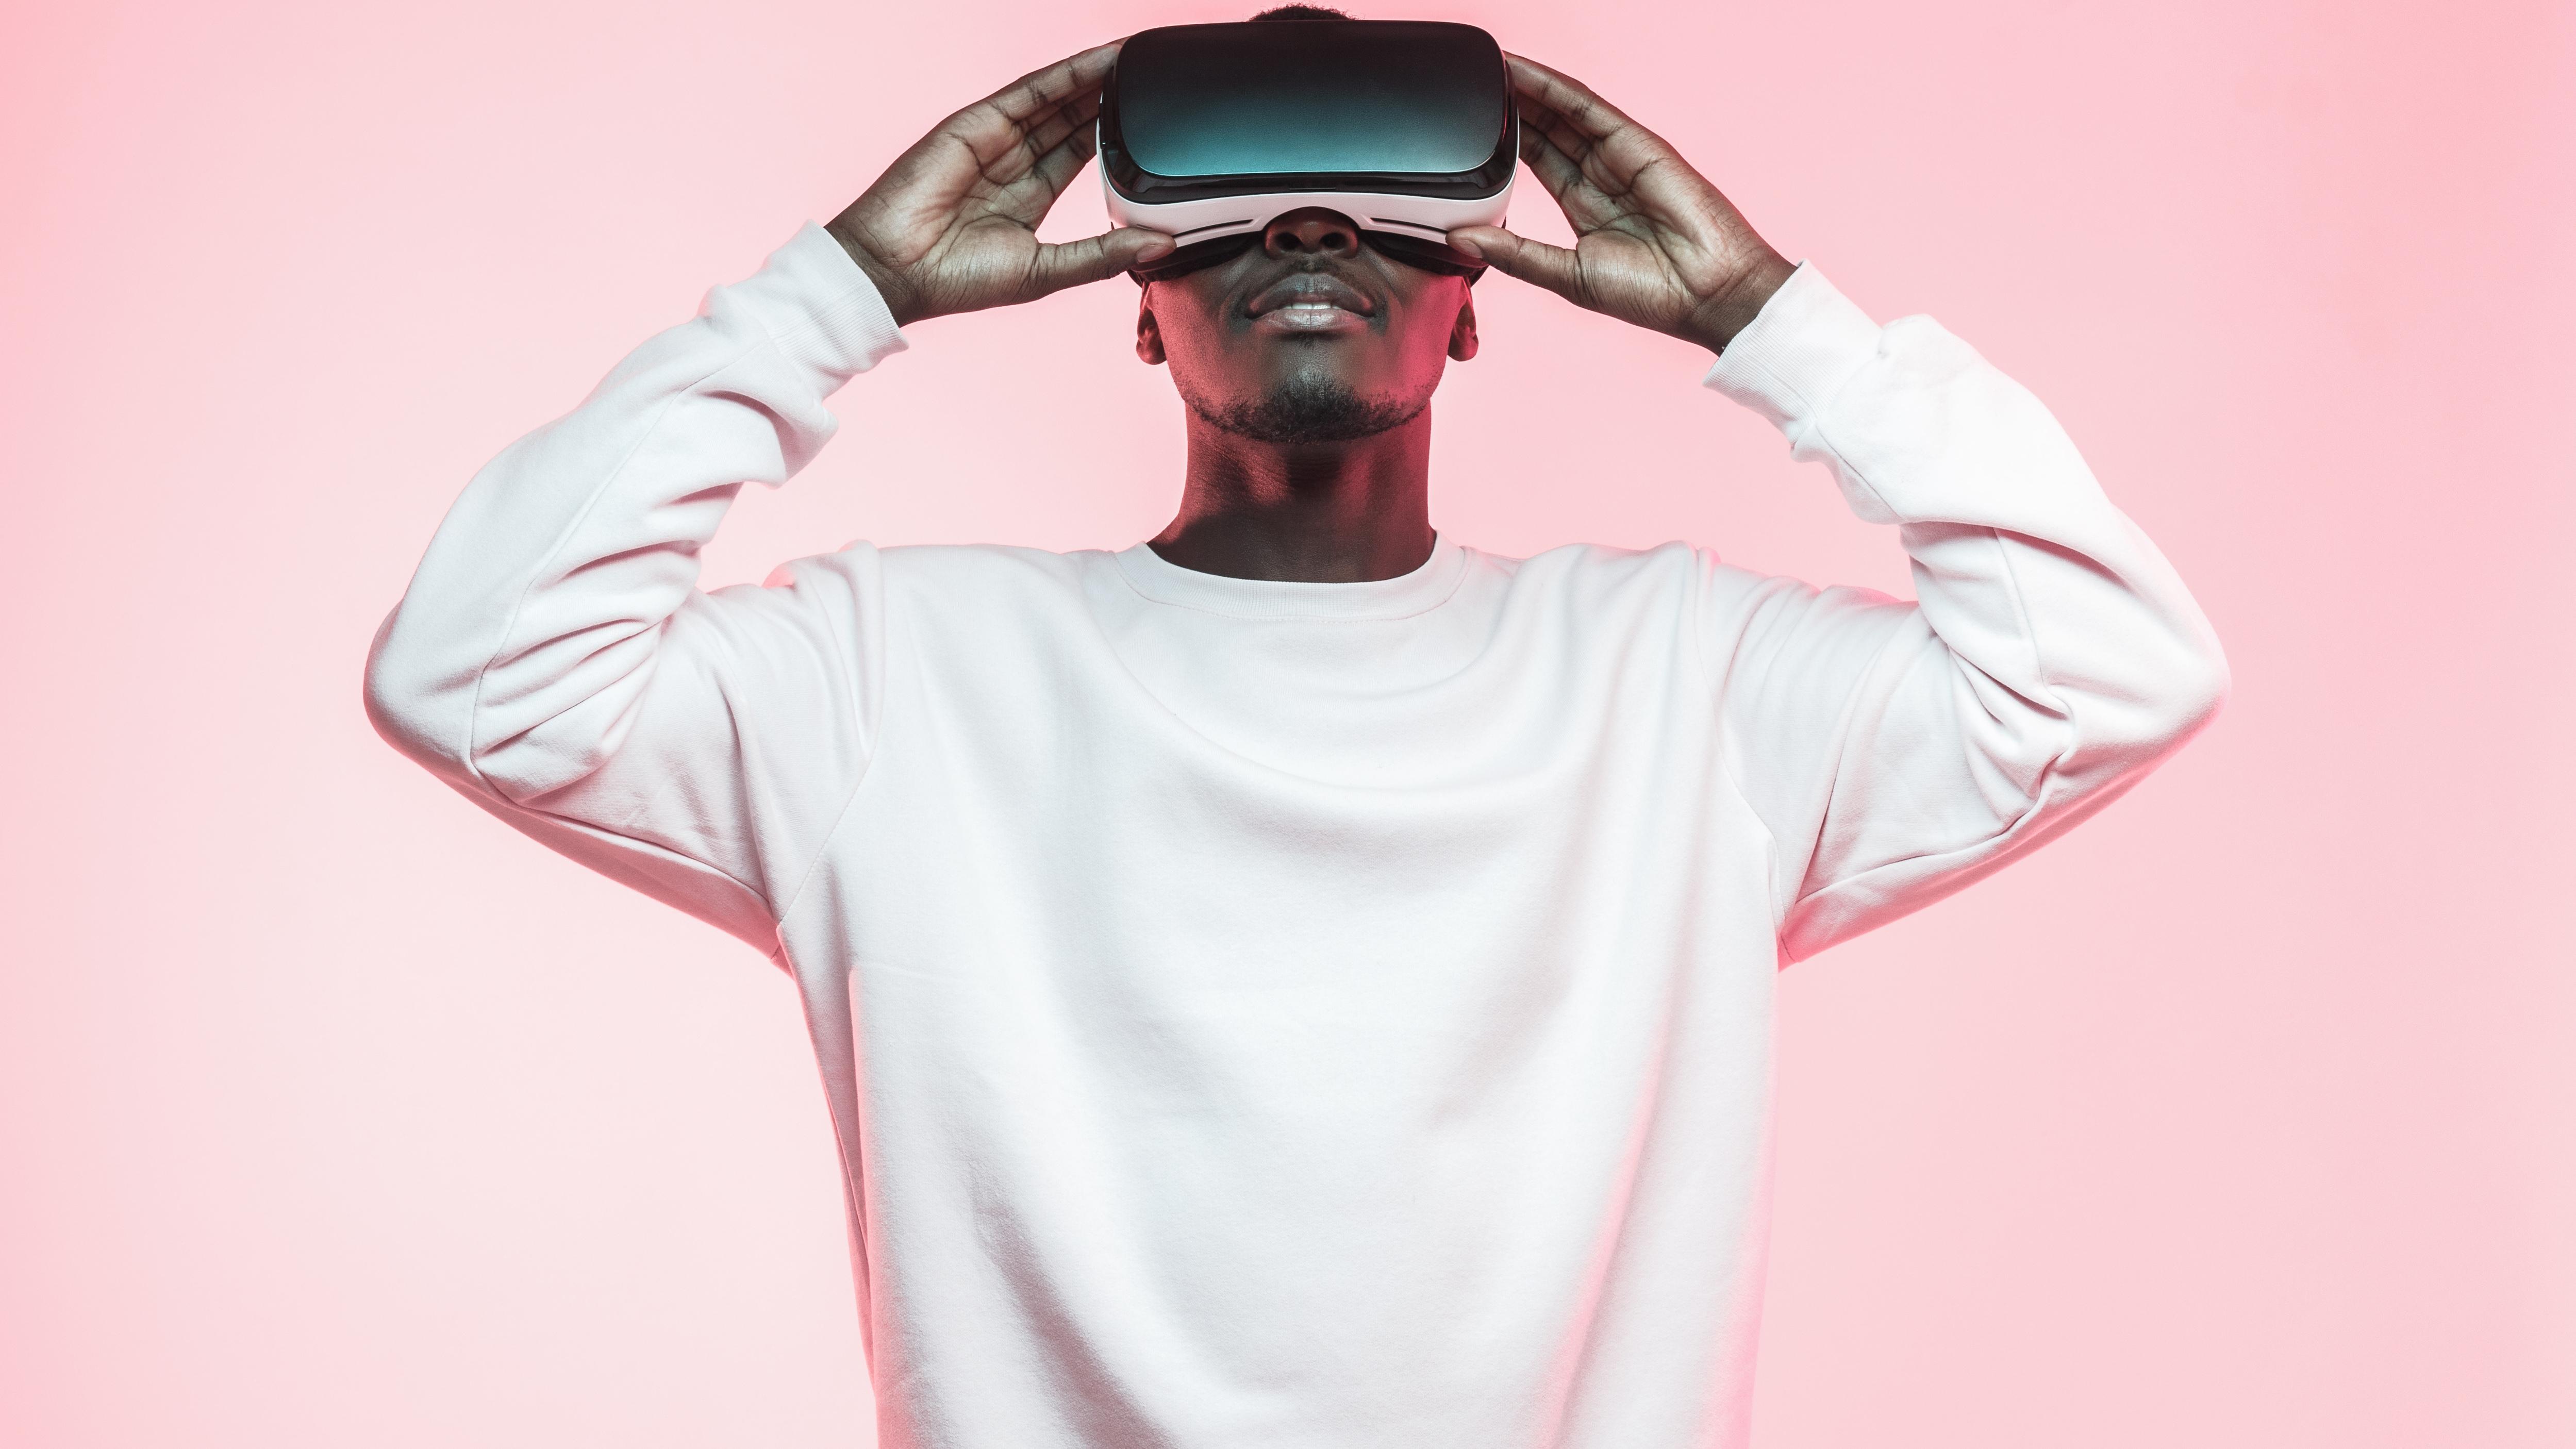 Young african man holding virtual reality goggles with both hands, isolated on pink background